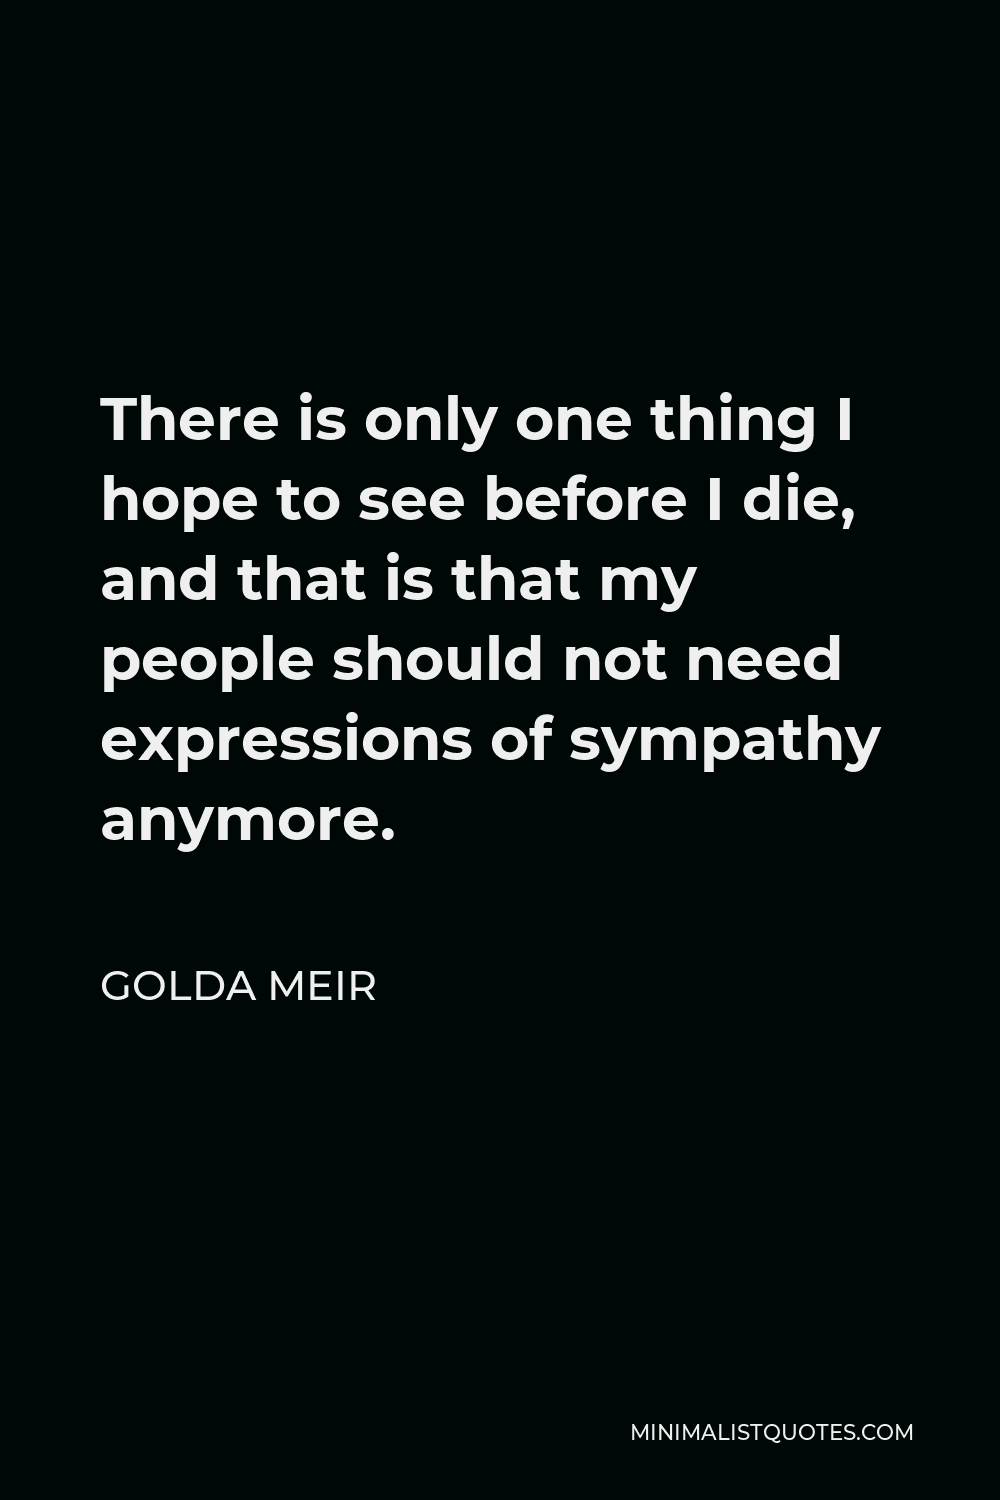 Golda Meir Quote - There is only one thing I hope to see before I die, and that is that my people should not need expressions of sympathy anymore.